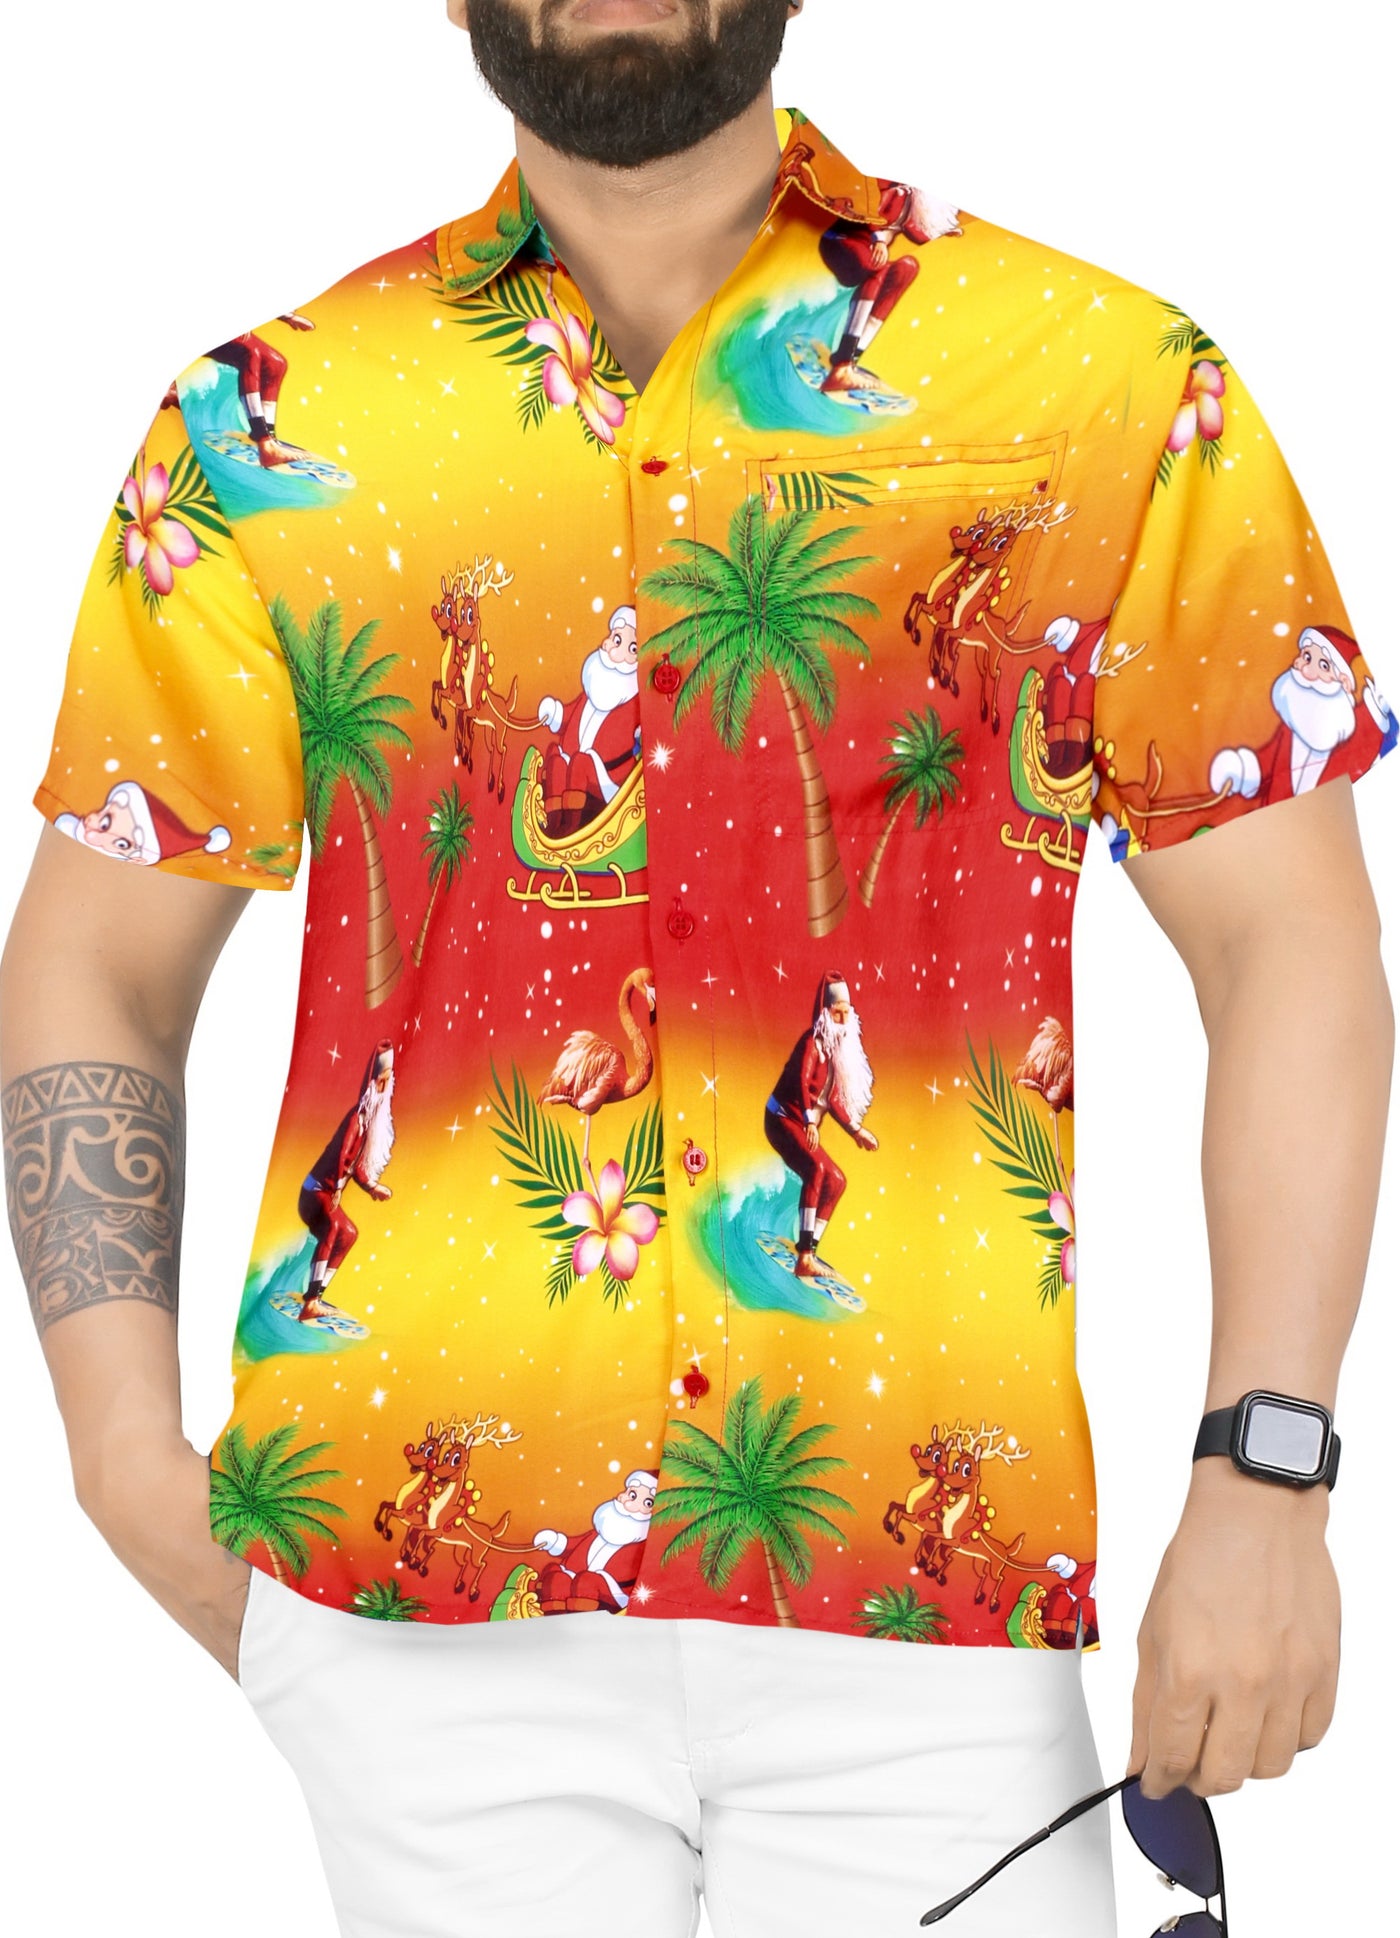 Ride the Waves with Santa Shirt For men